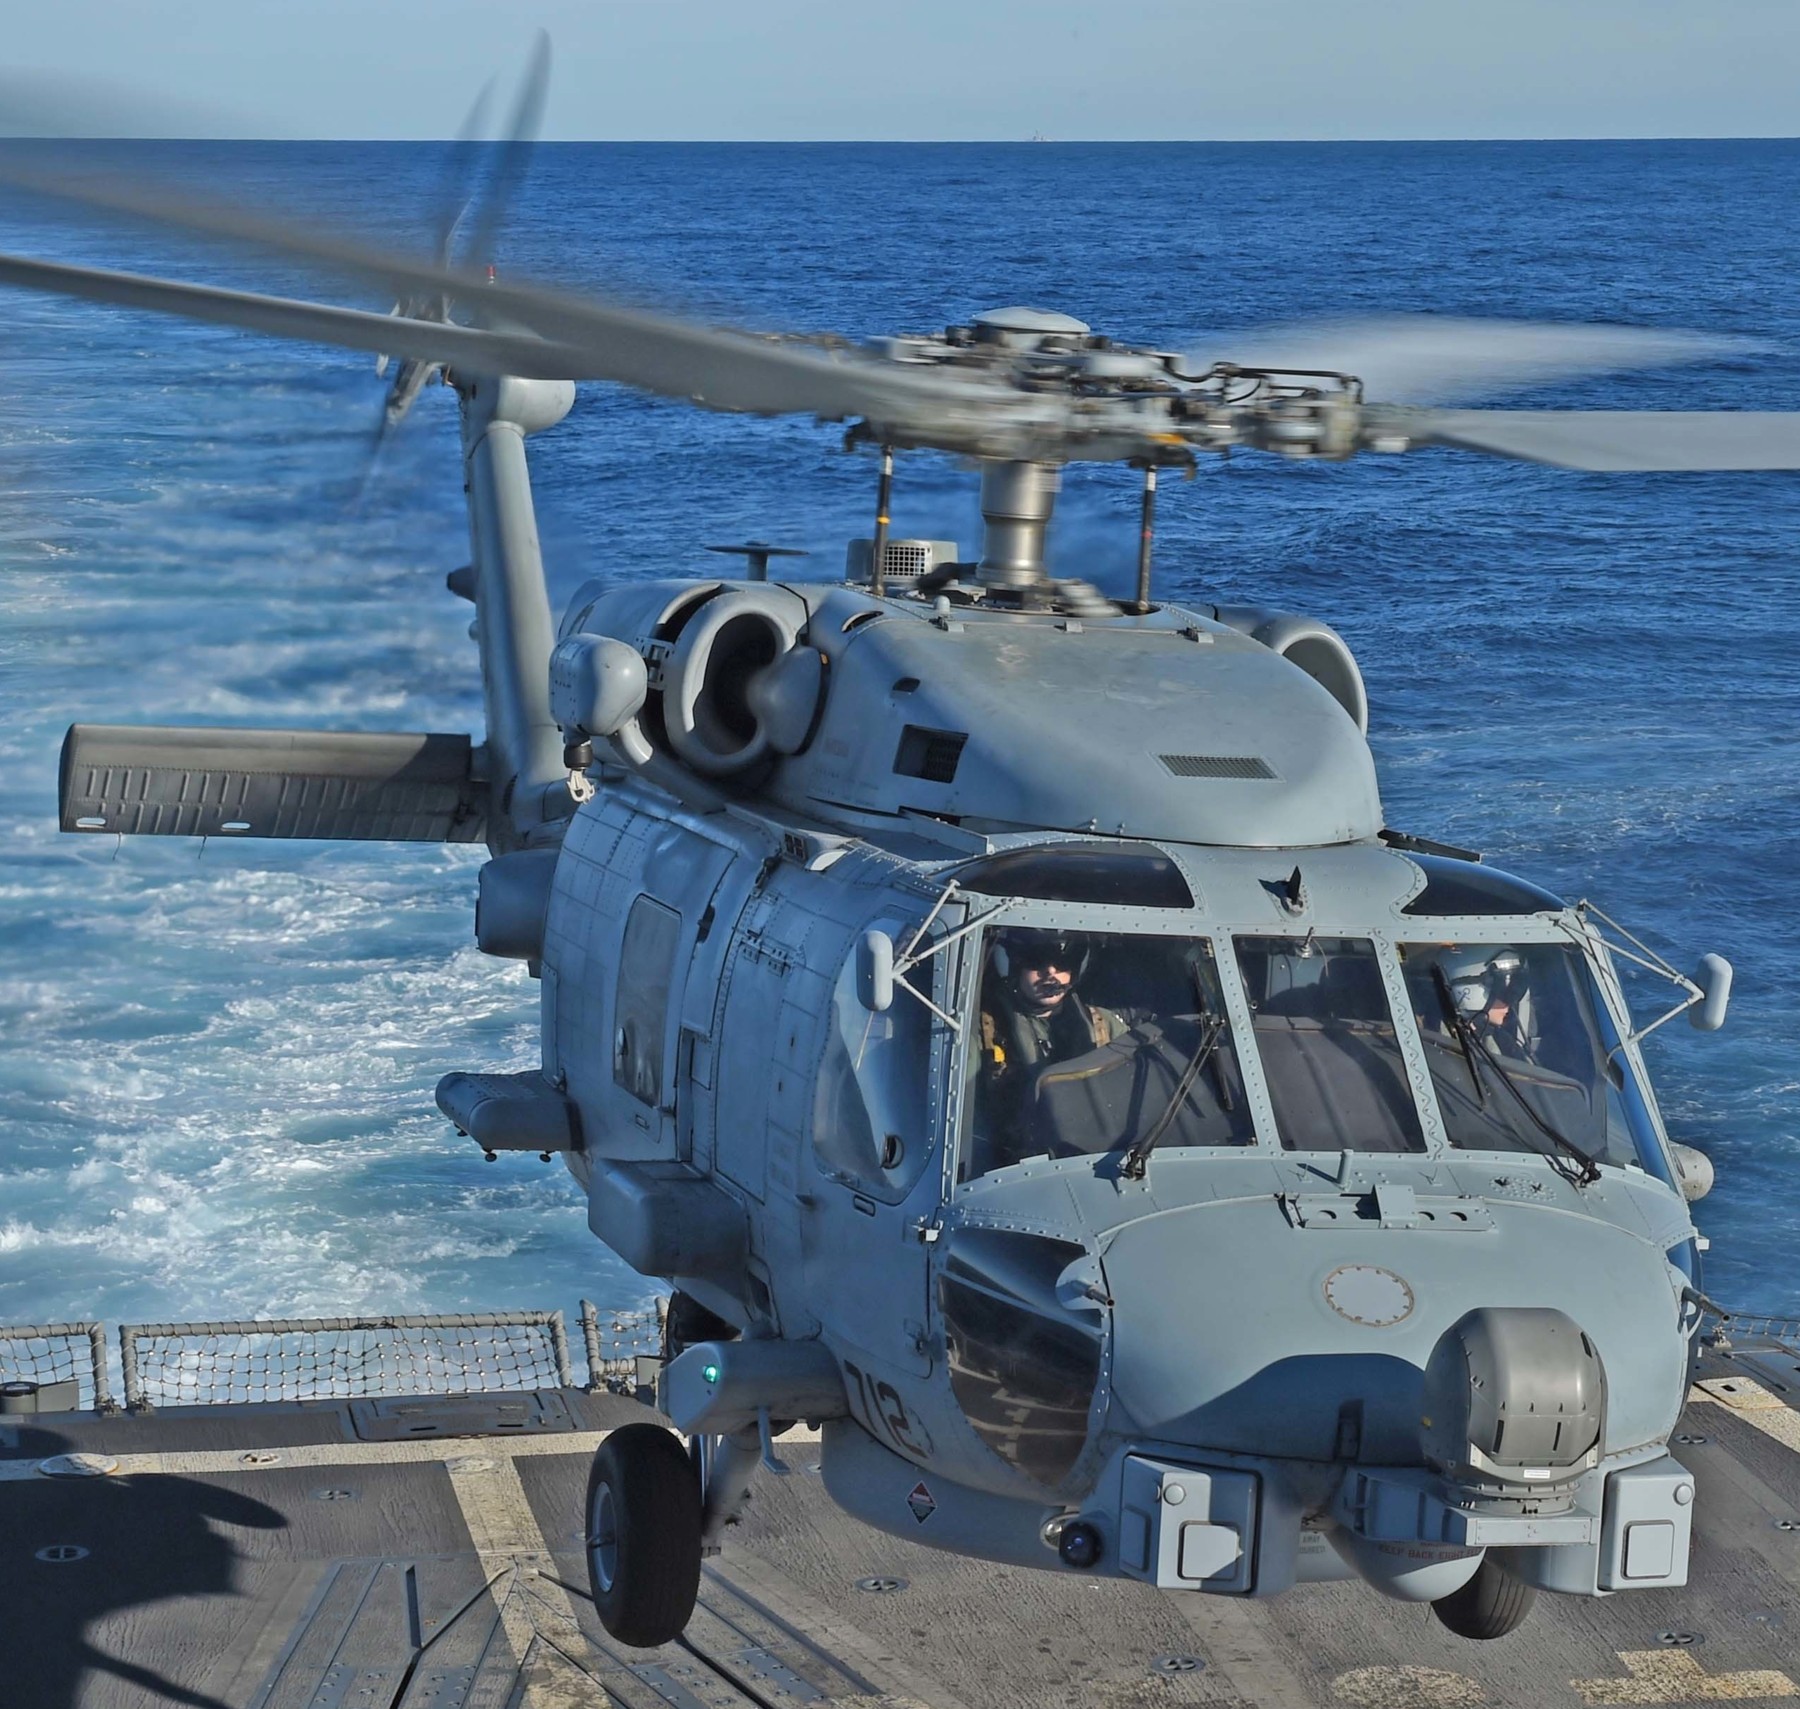 hsm-71 raptors helicopter maritime strike squadron mh-60r seahawk navy 2015 07